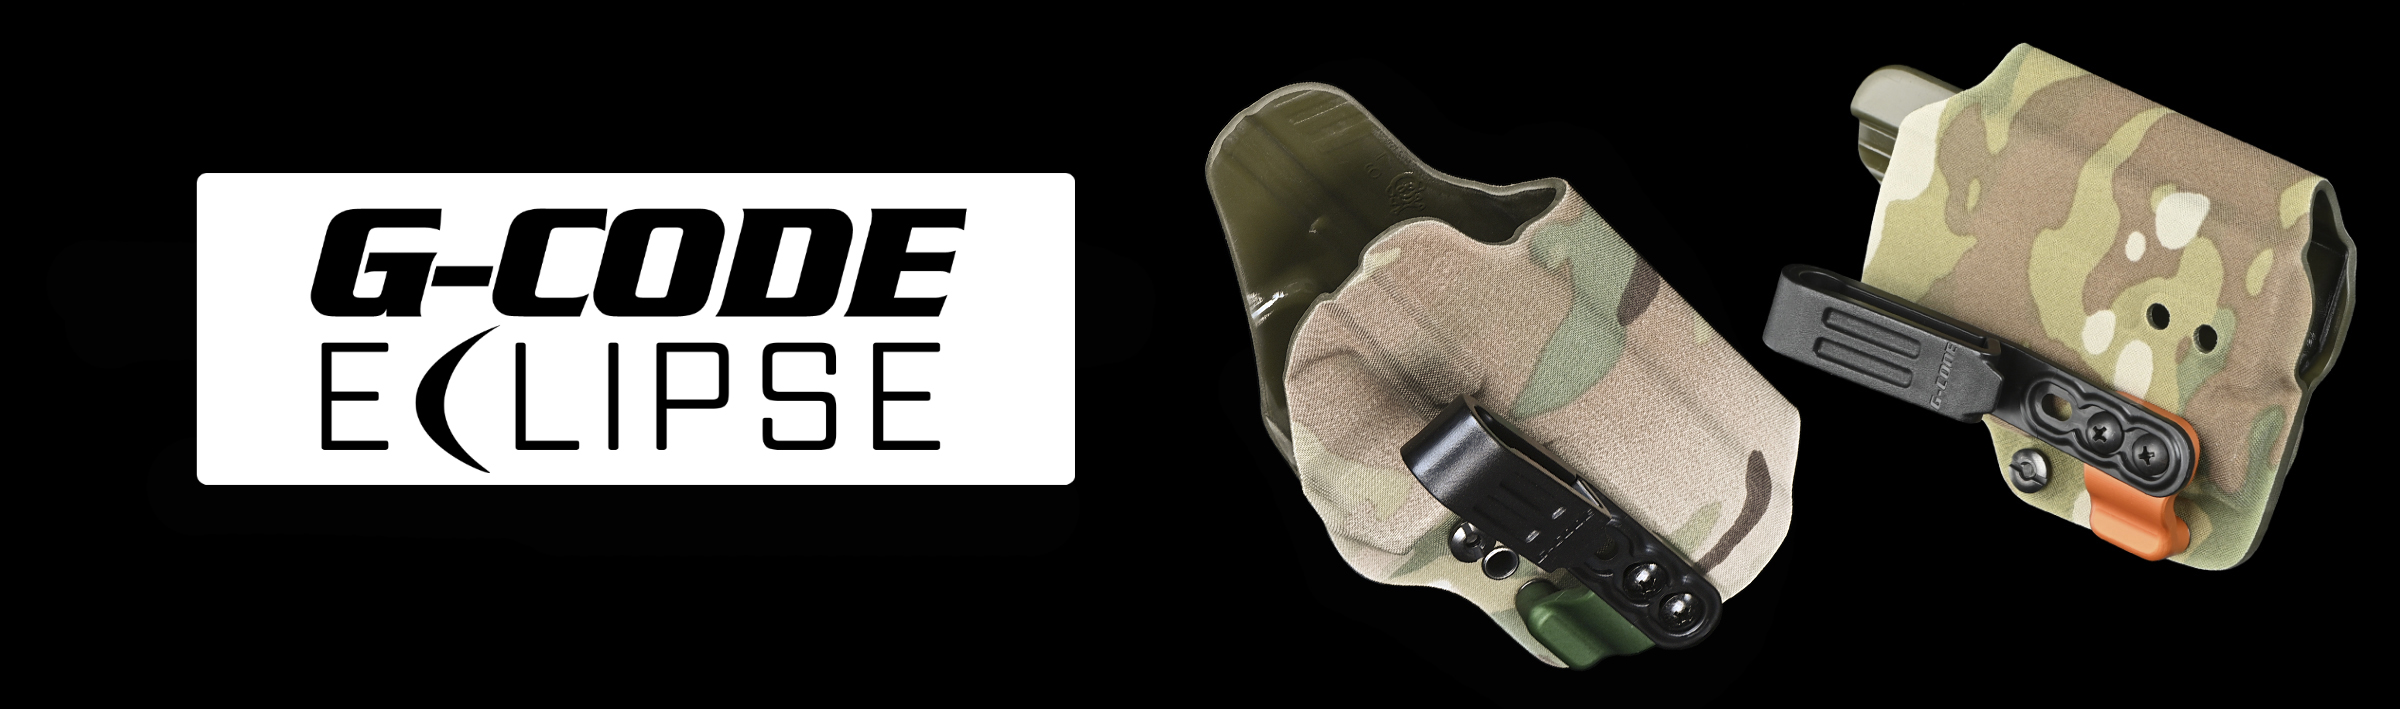 Eclipse Holster - tactical holsters and equipment